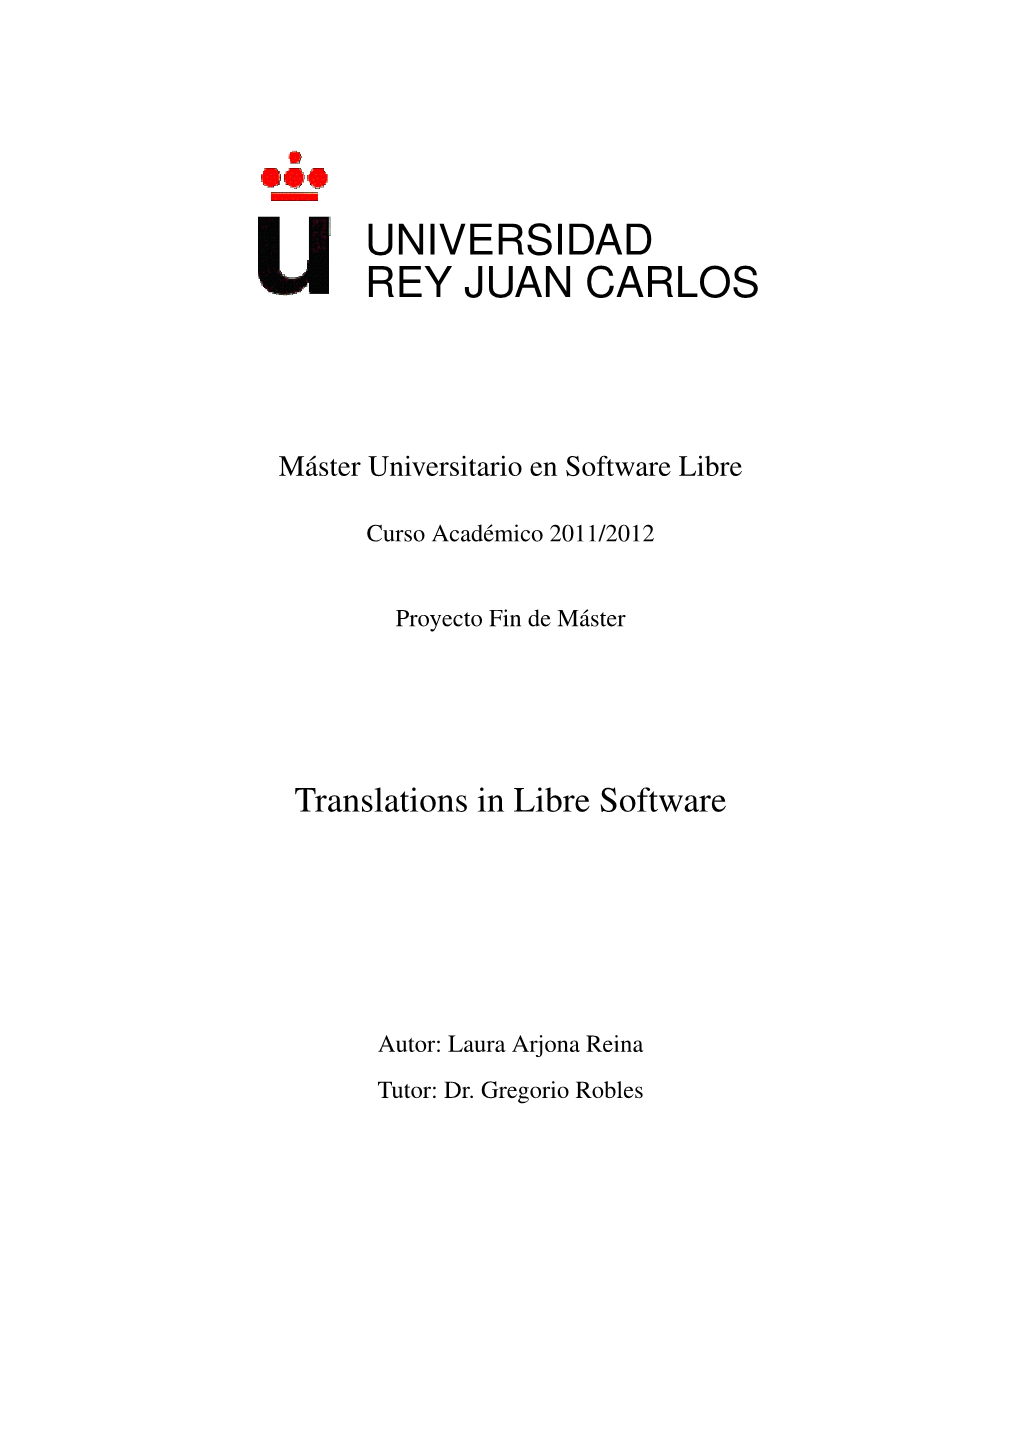 Translations in Libre Software